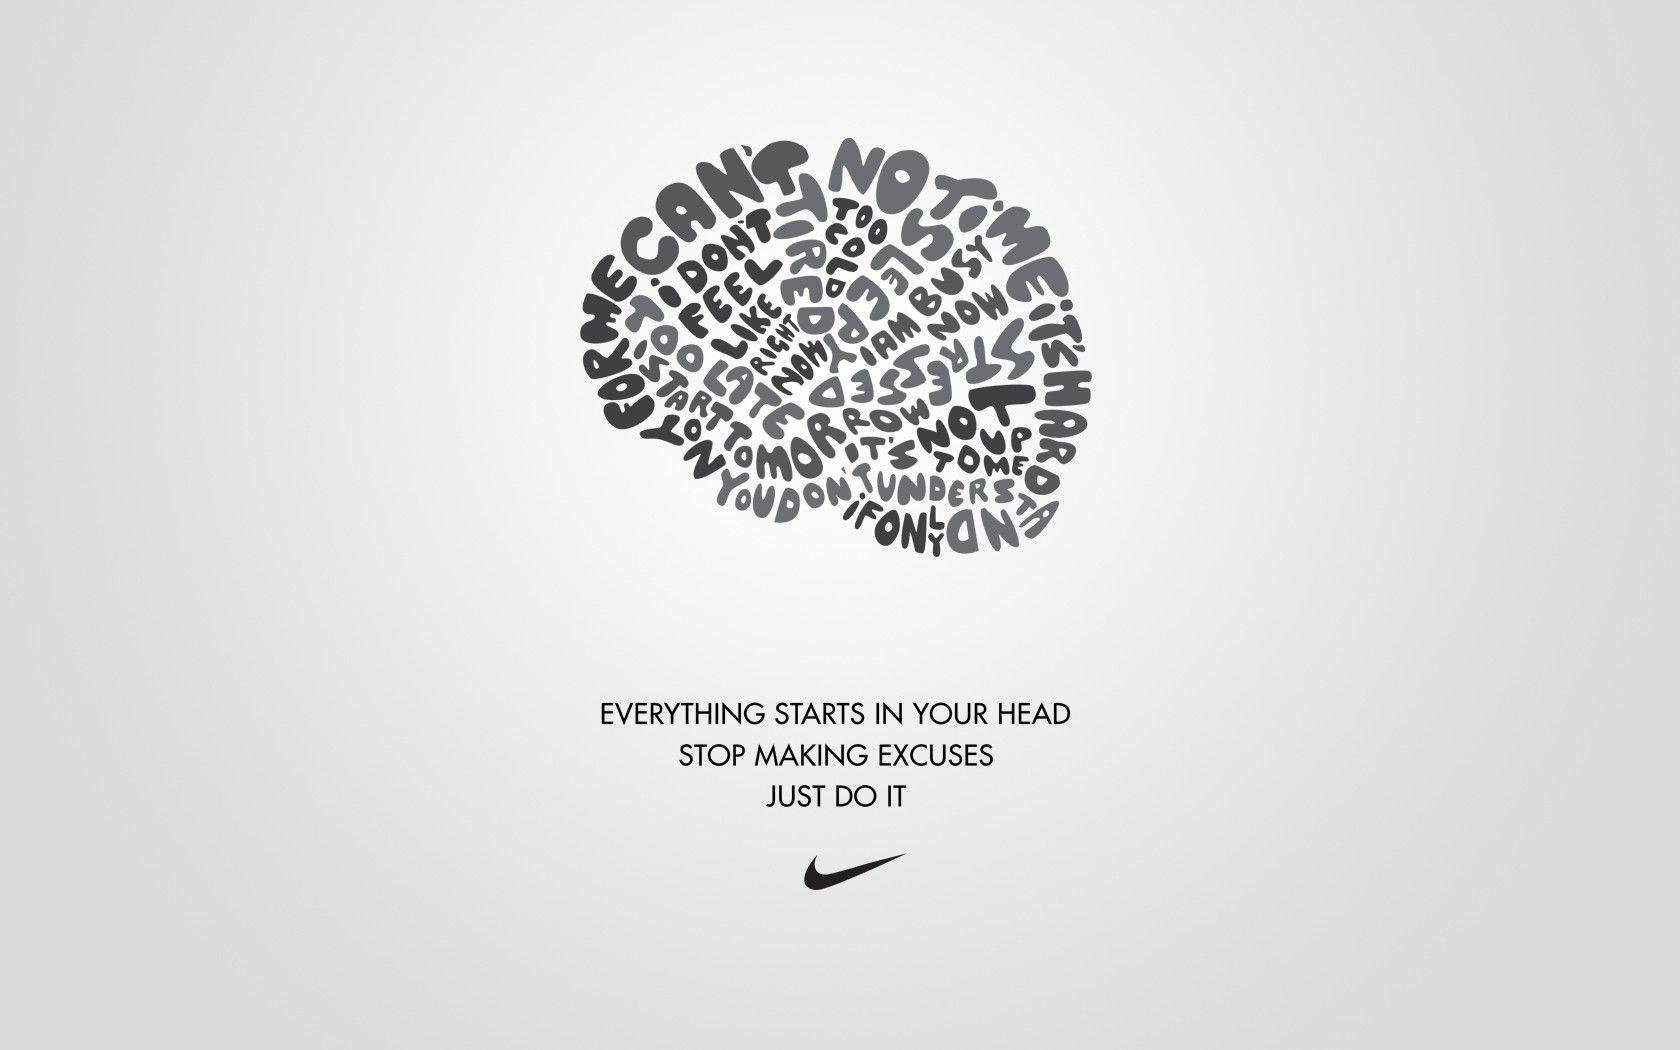 text, typography, Nike, inspirational, simple background, motivation